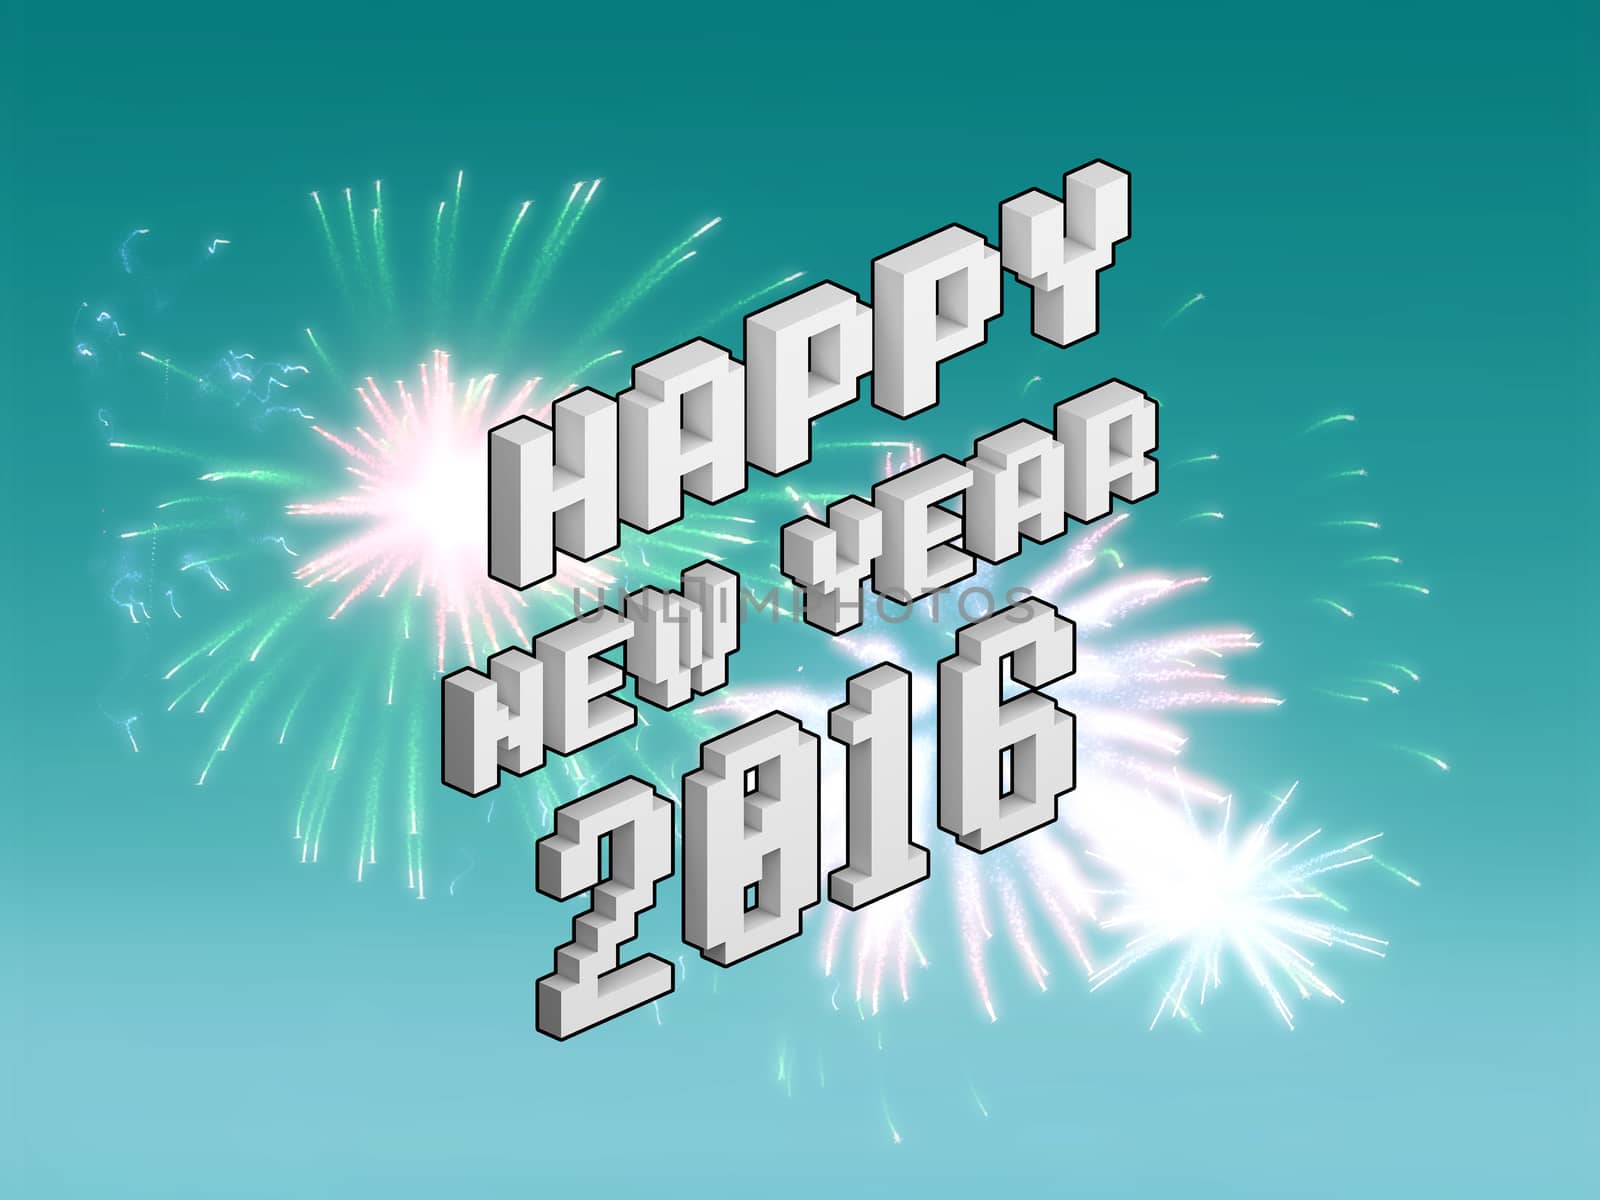 Happy new year fireworks 2016 holiday background design by teerawit